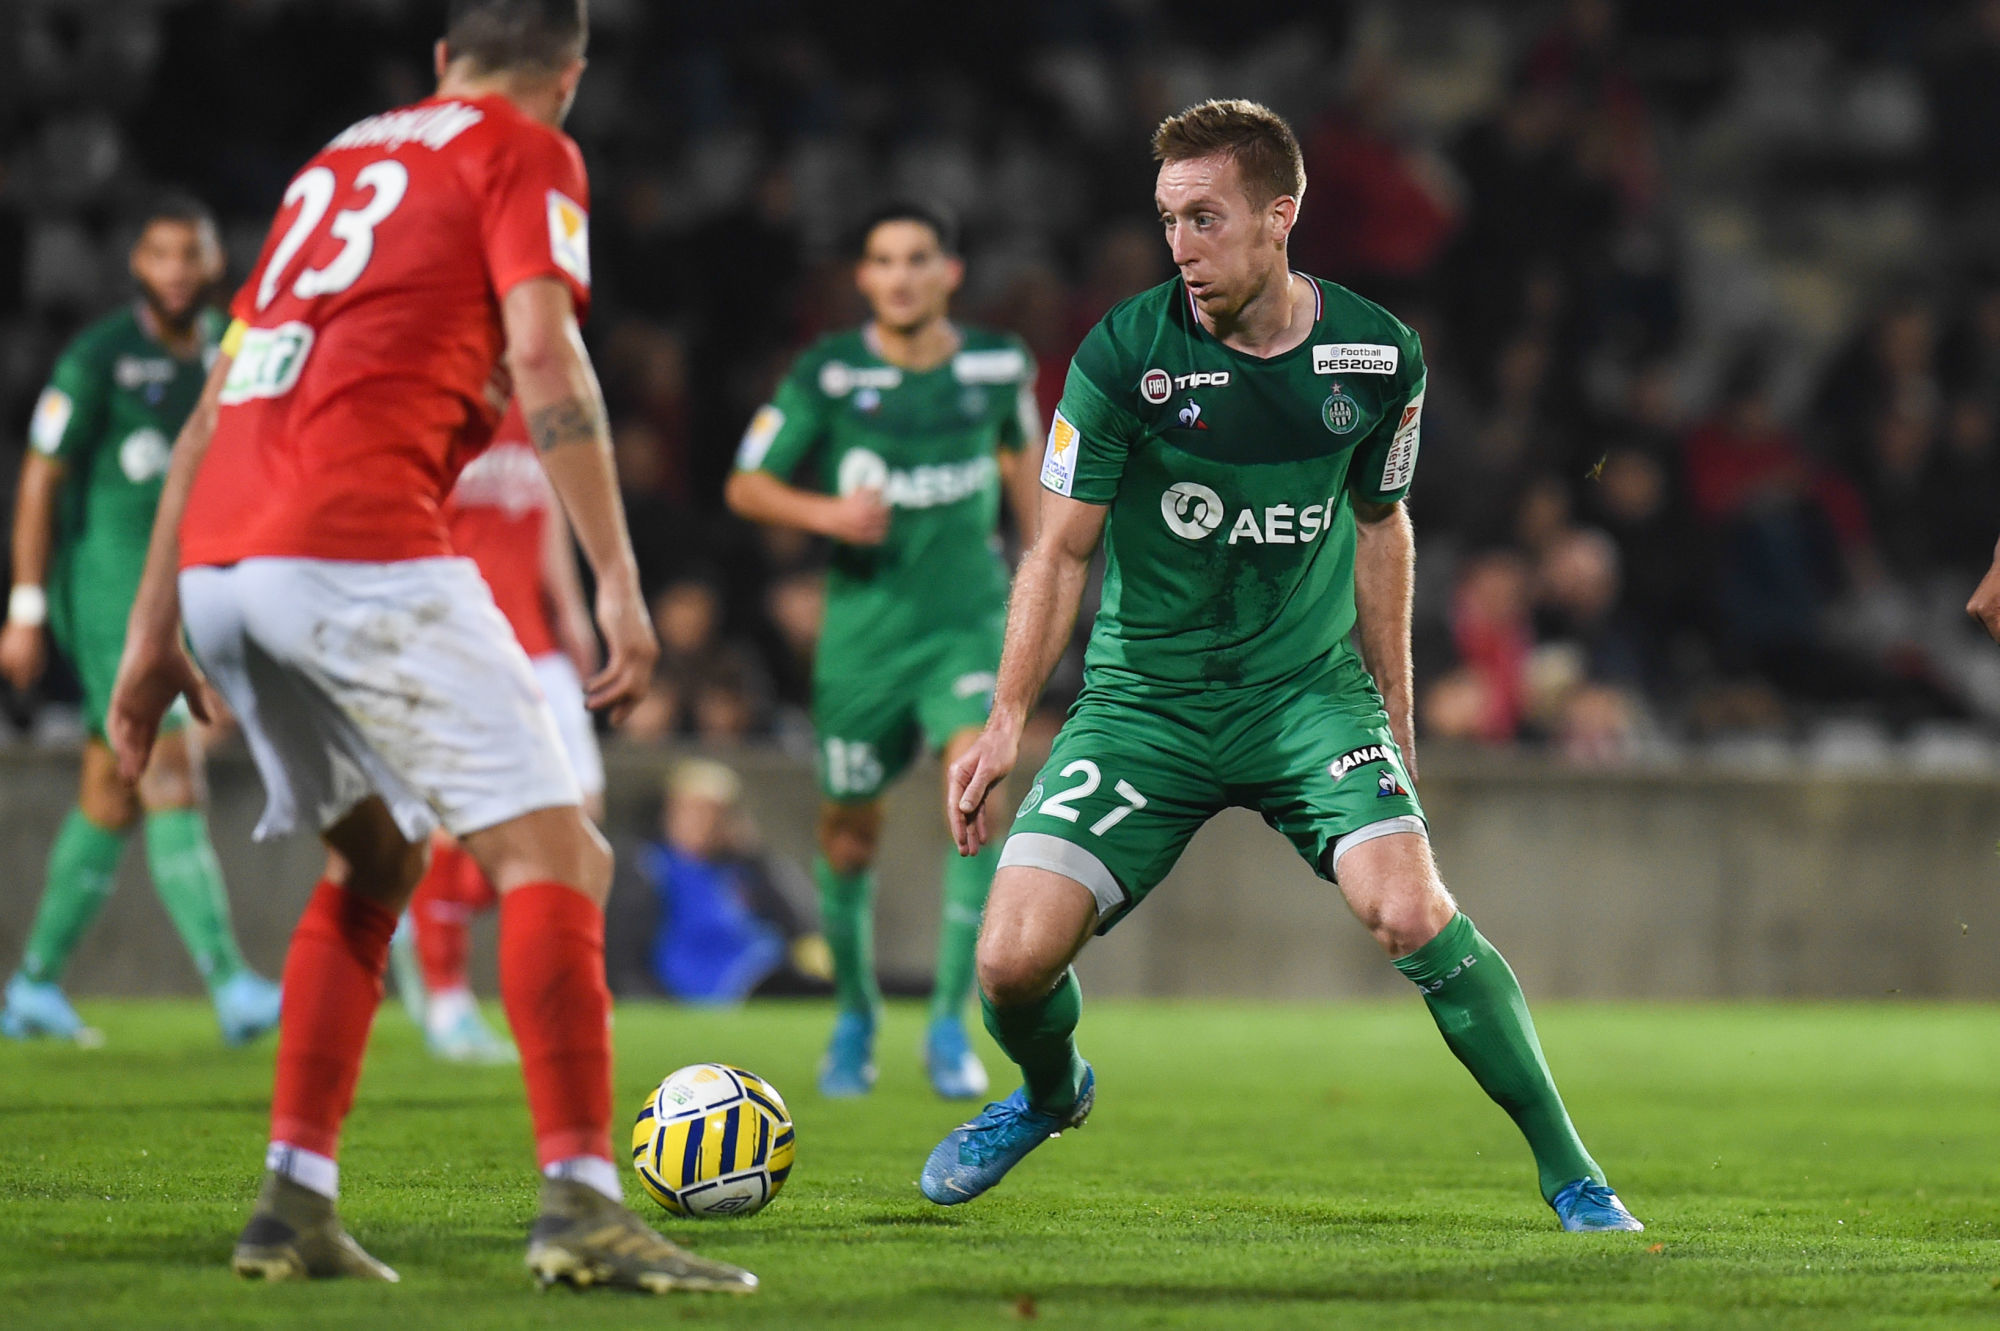 Robert BERIC of Saint-Etienne  during the League Cup match between Nimes and Saint Etienne on December 18, 2019 in Nimes, France. (Photo by Alexandre Dimou/Icon Sport) - Robert BERIC - Stade des Costières - Nimes (France)